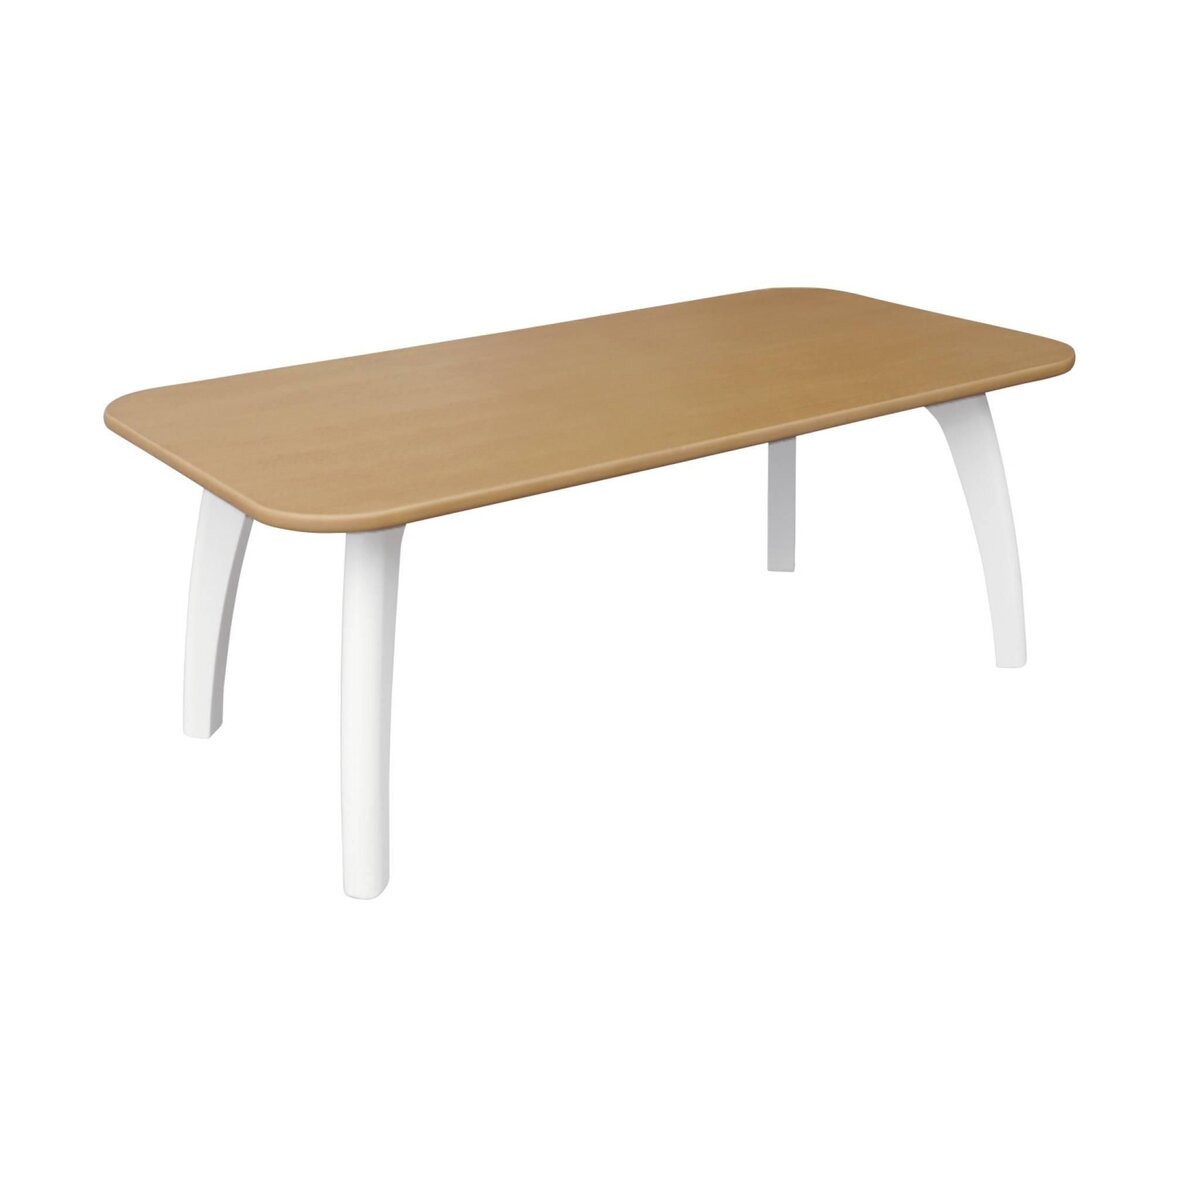 SWEEEK Table basse rectangulaire MDF et placage chêne